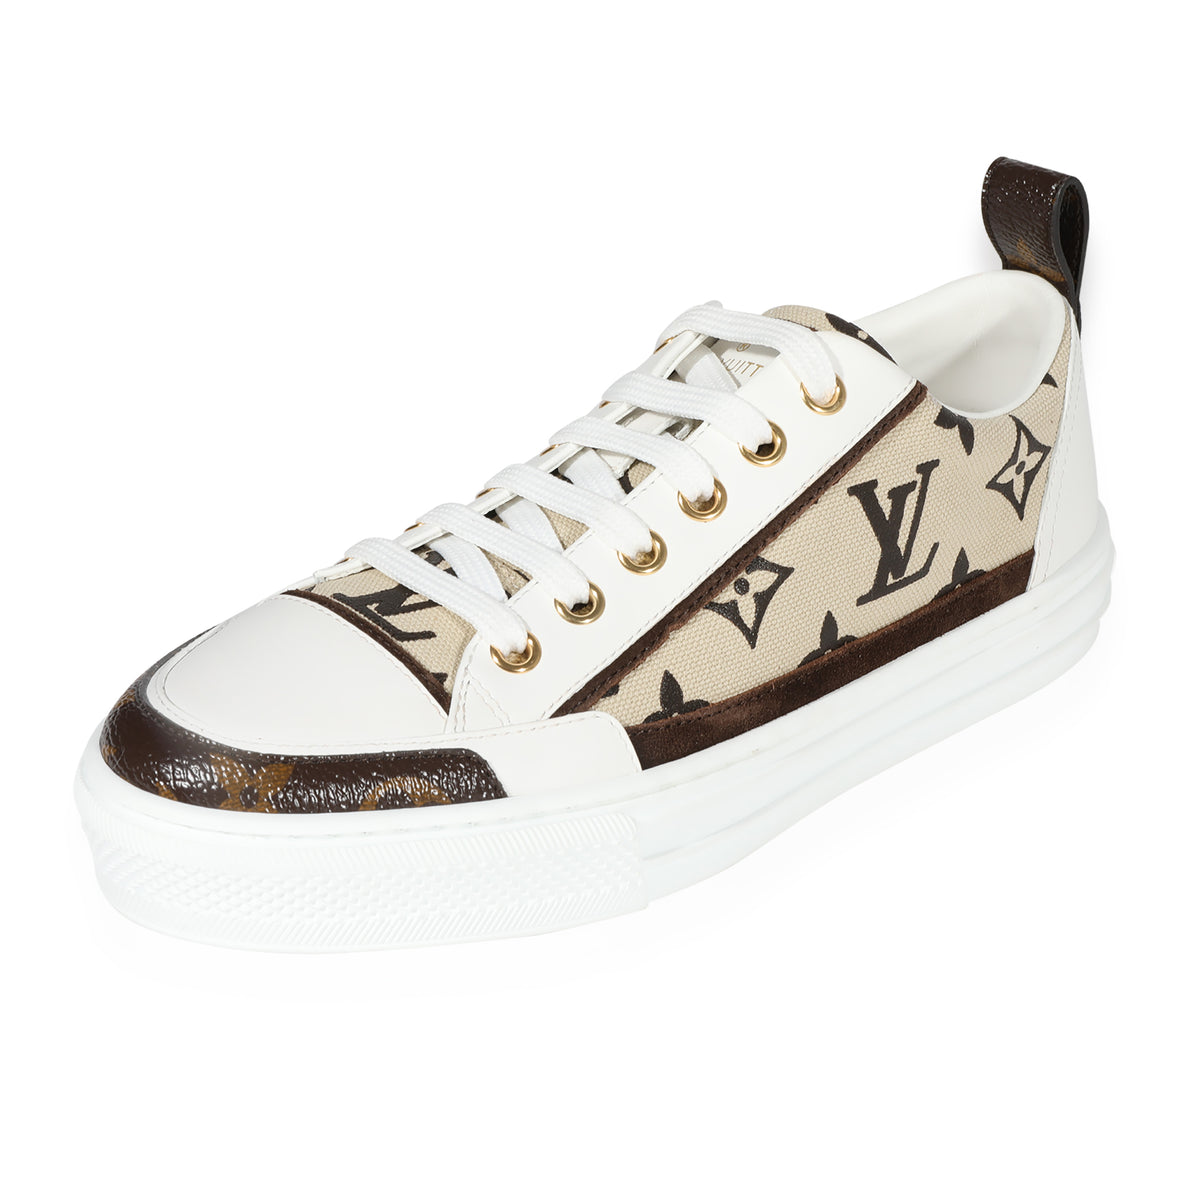 Products By Louis Vuitton: Stellar Sneaker